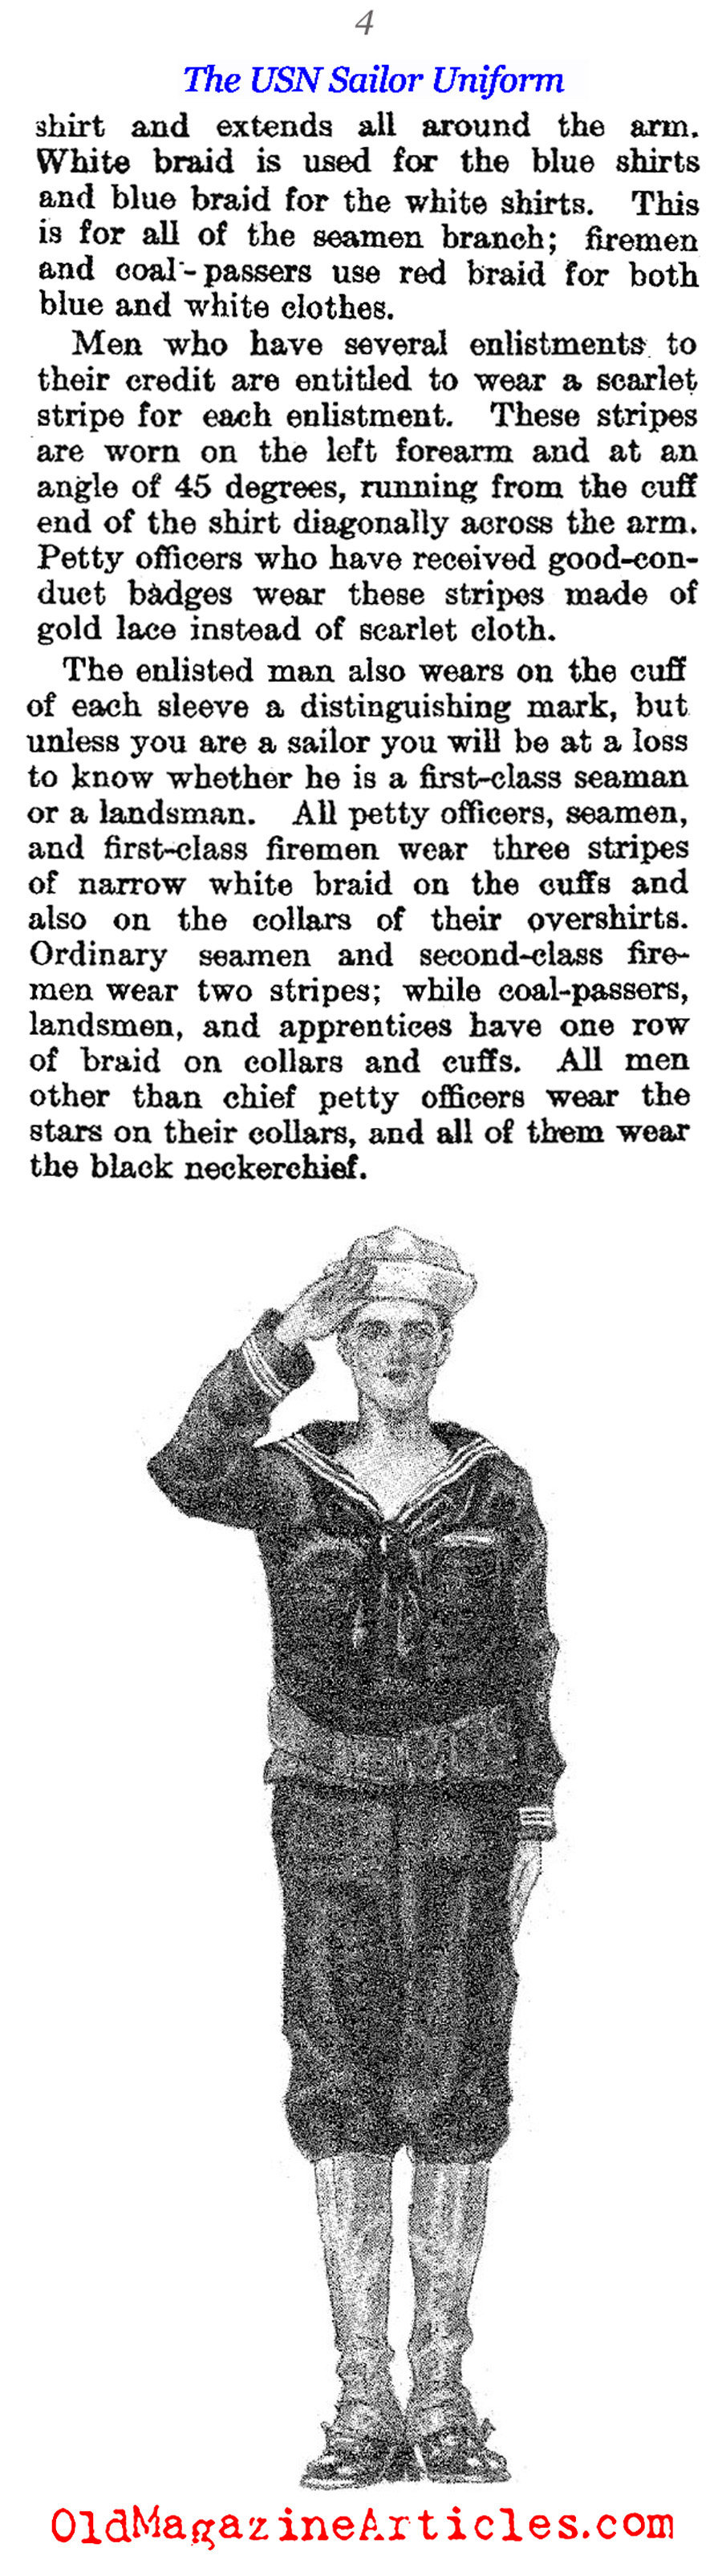 The American Sailor Uniform: An Explanation  (The Literary Digest, 1917)